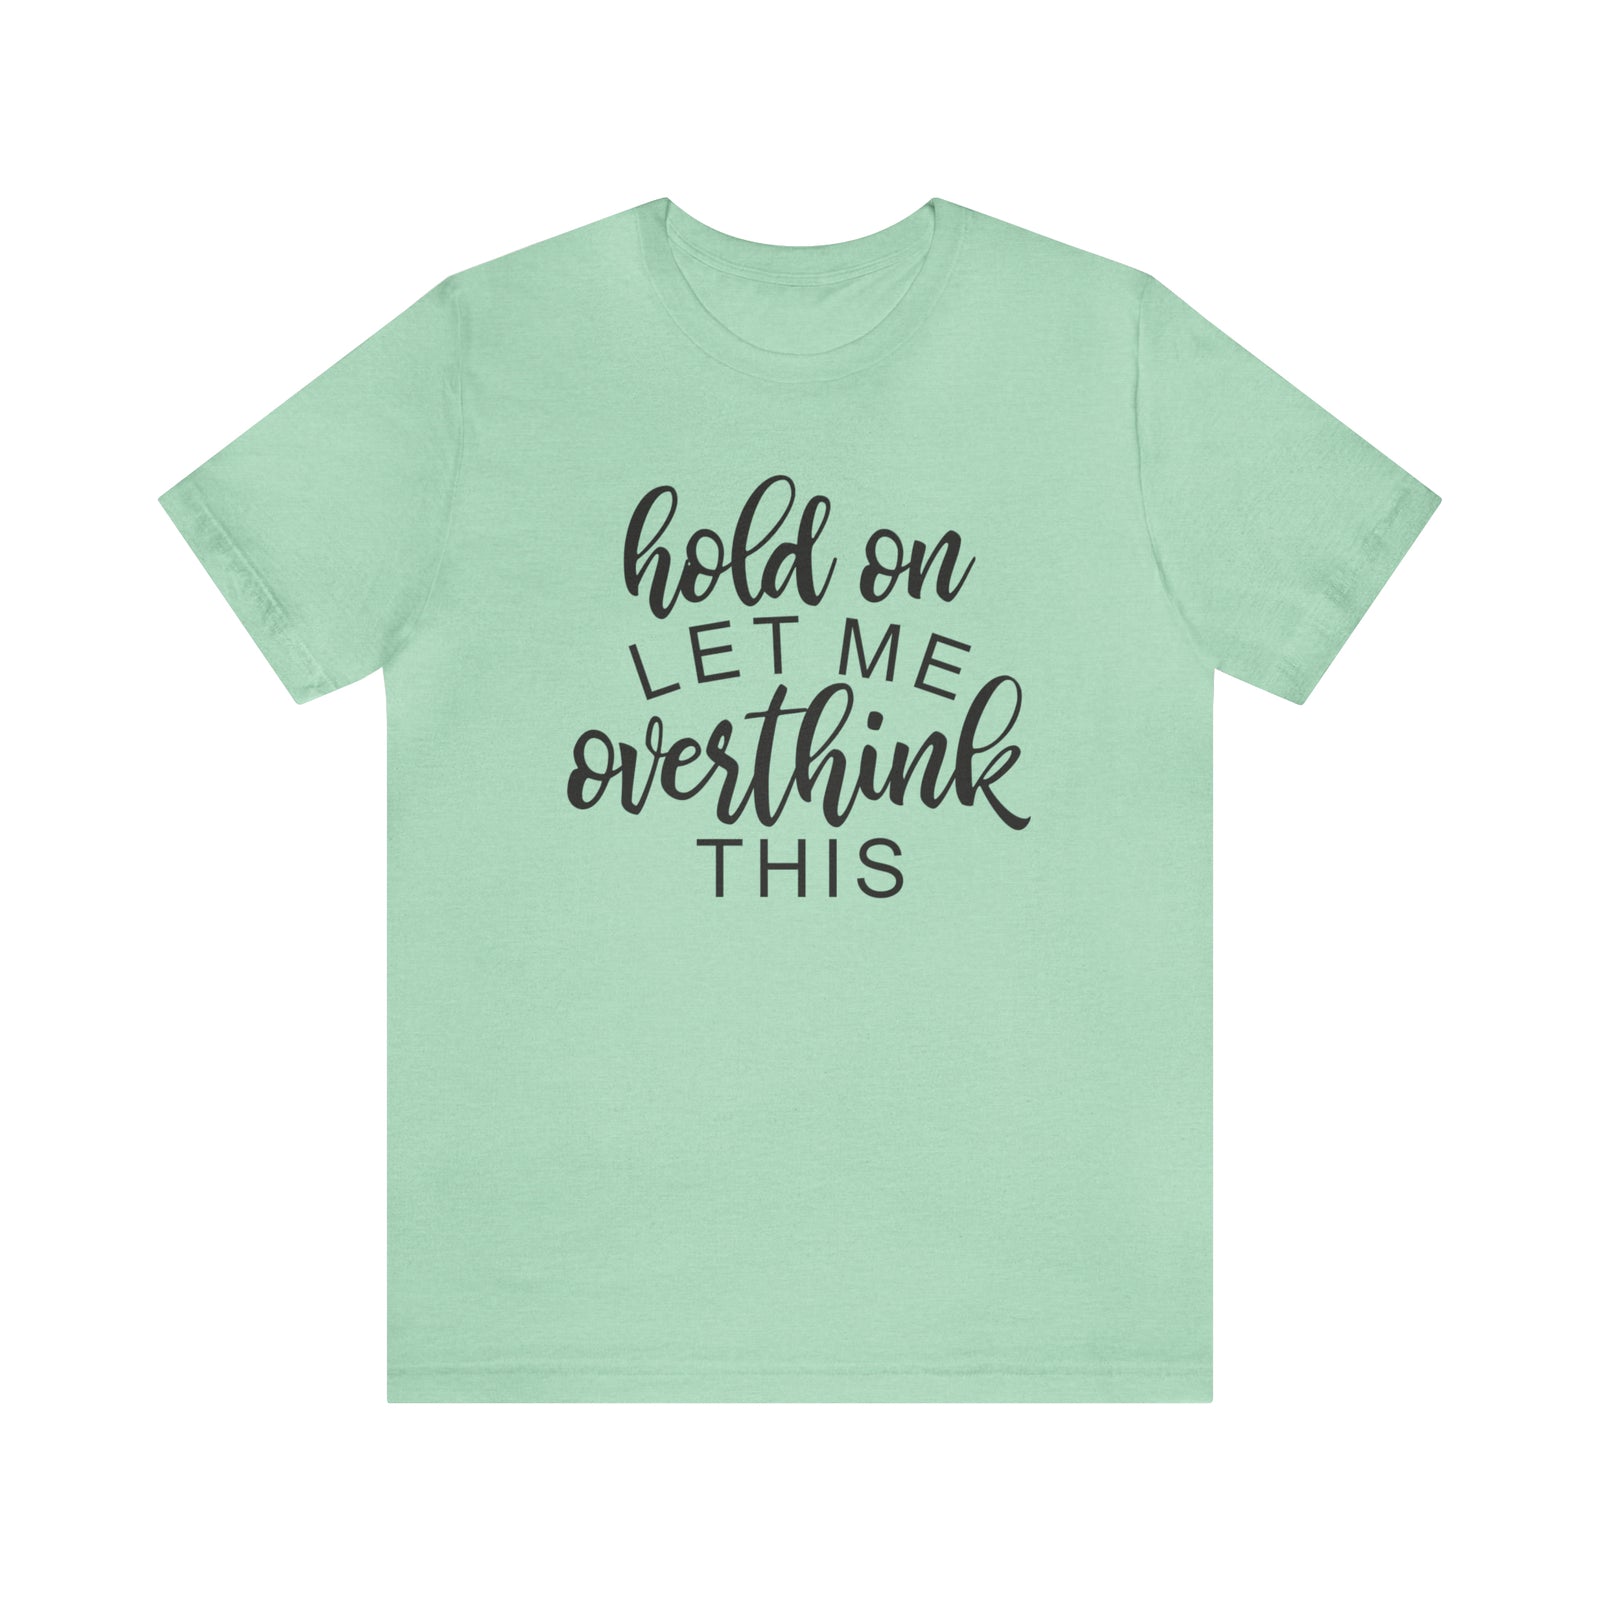 Overthink this T-shirt - Sarcasm Swag